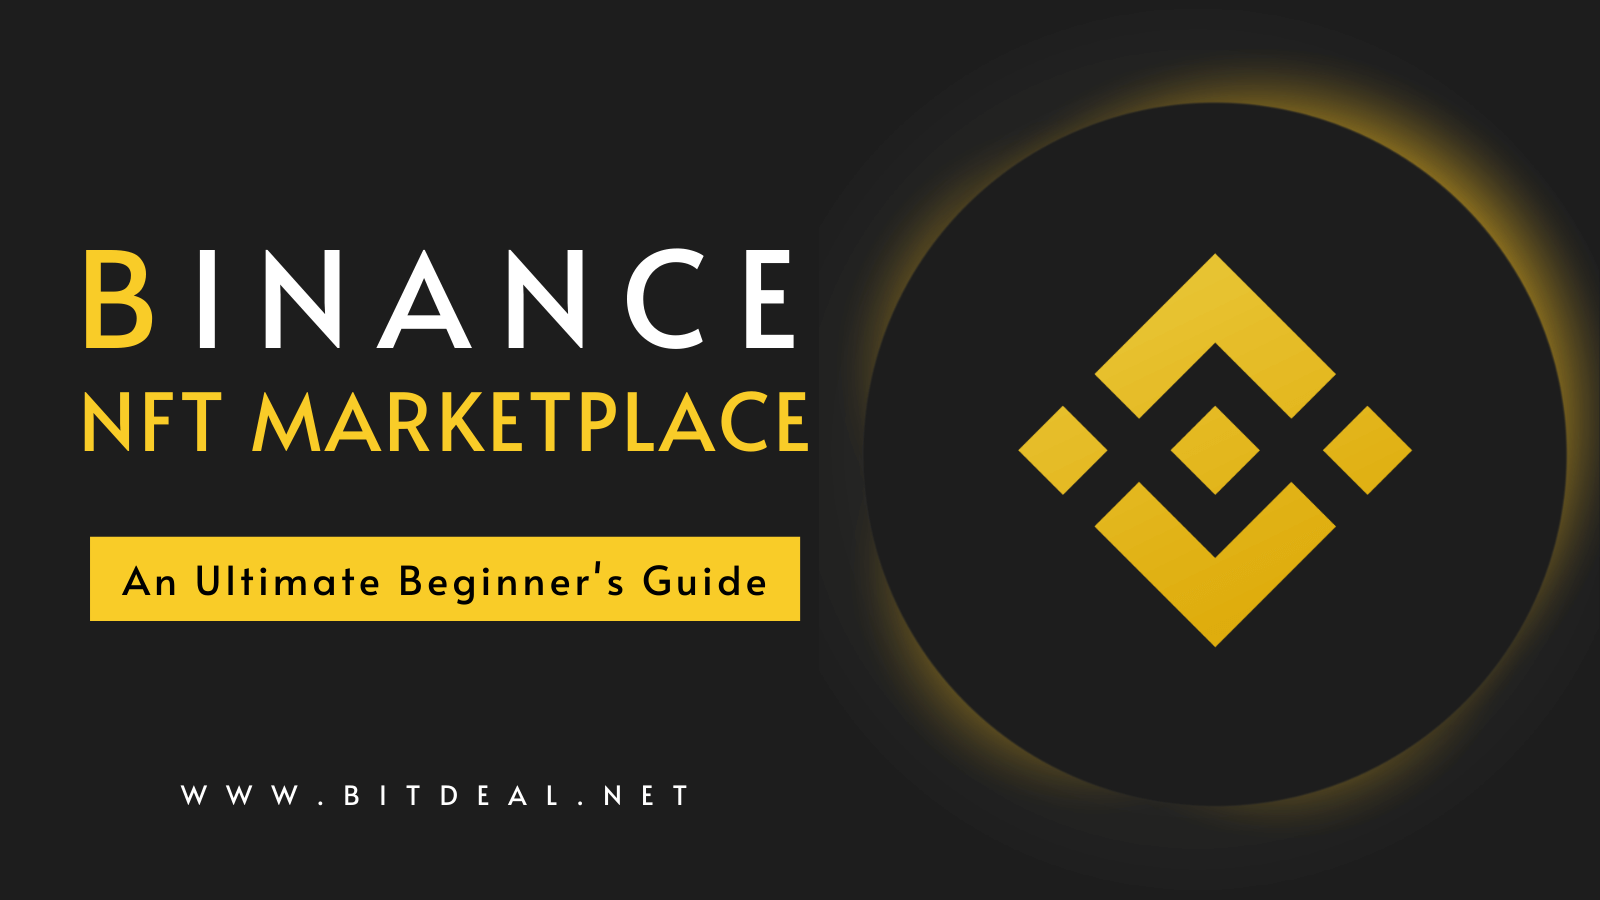 Binance NFT Marketplace - Everything you need to know about this Epic platform